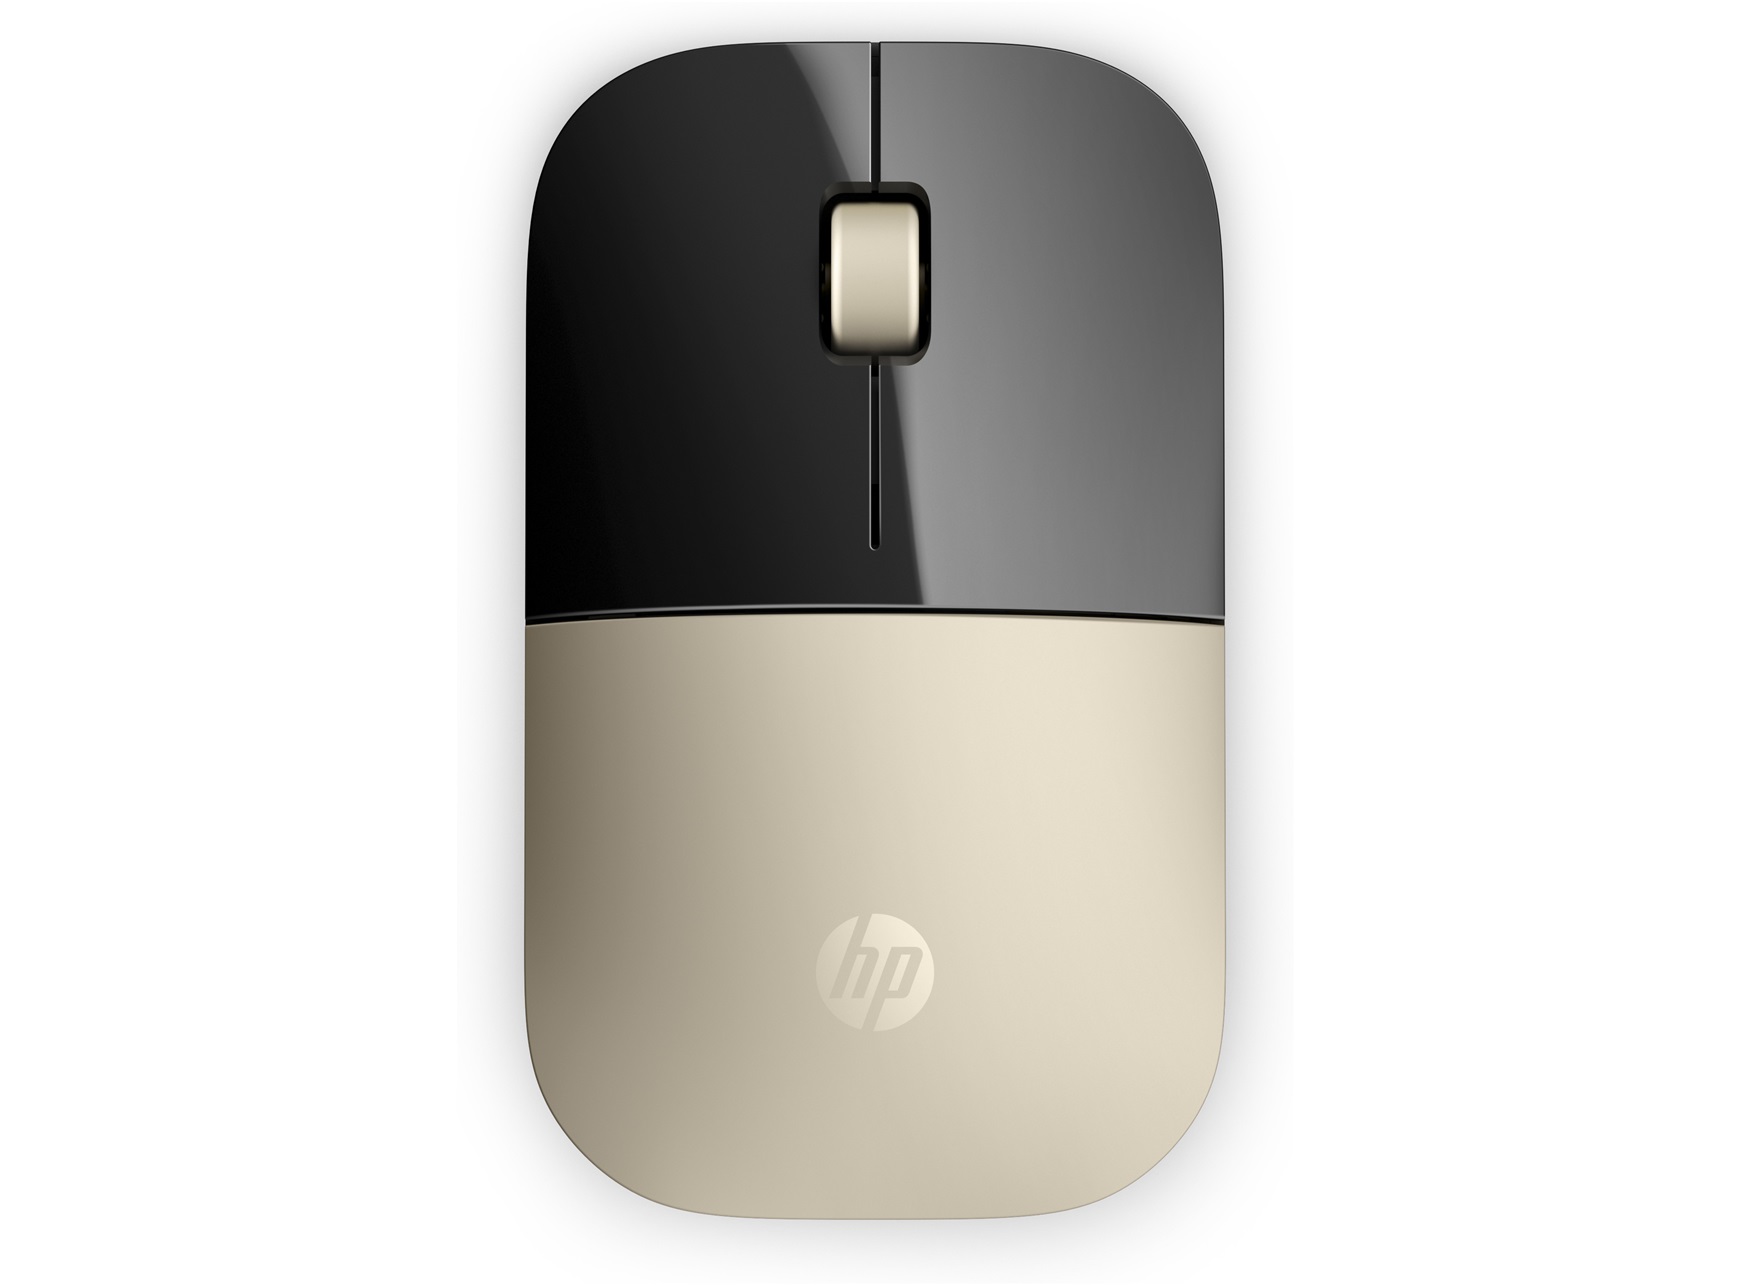 HP Z3700 Wireless Mouse, X7Q43AA